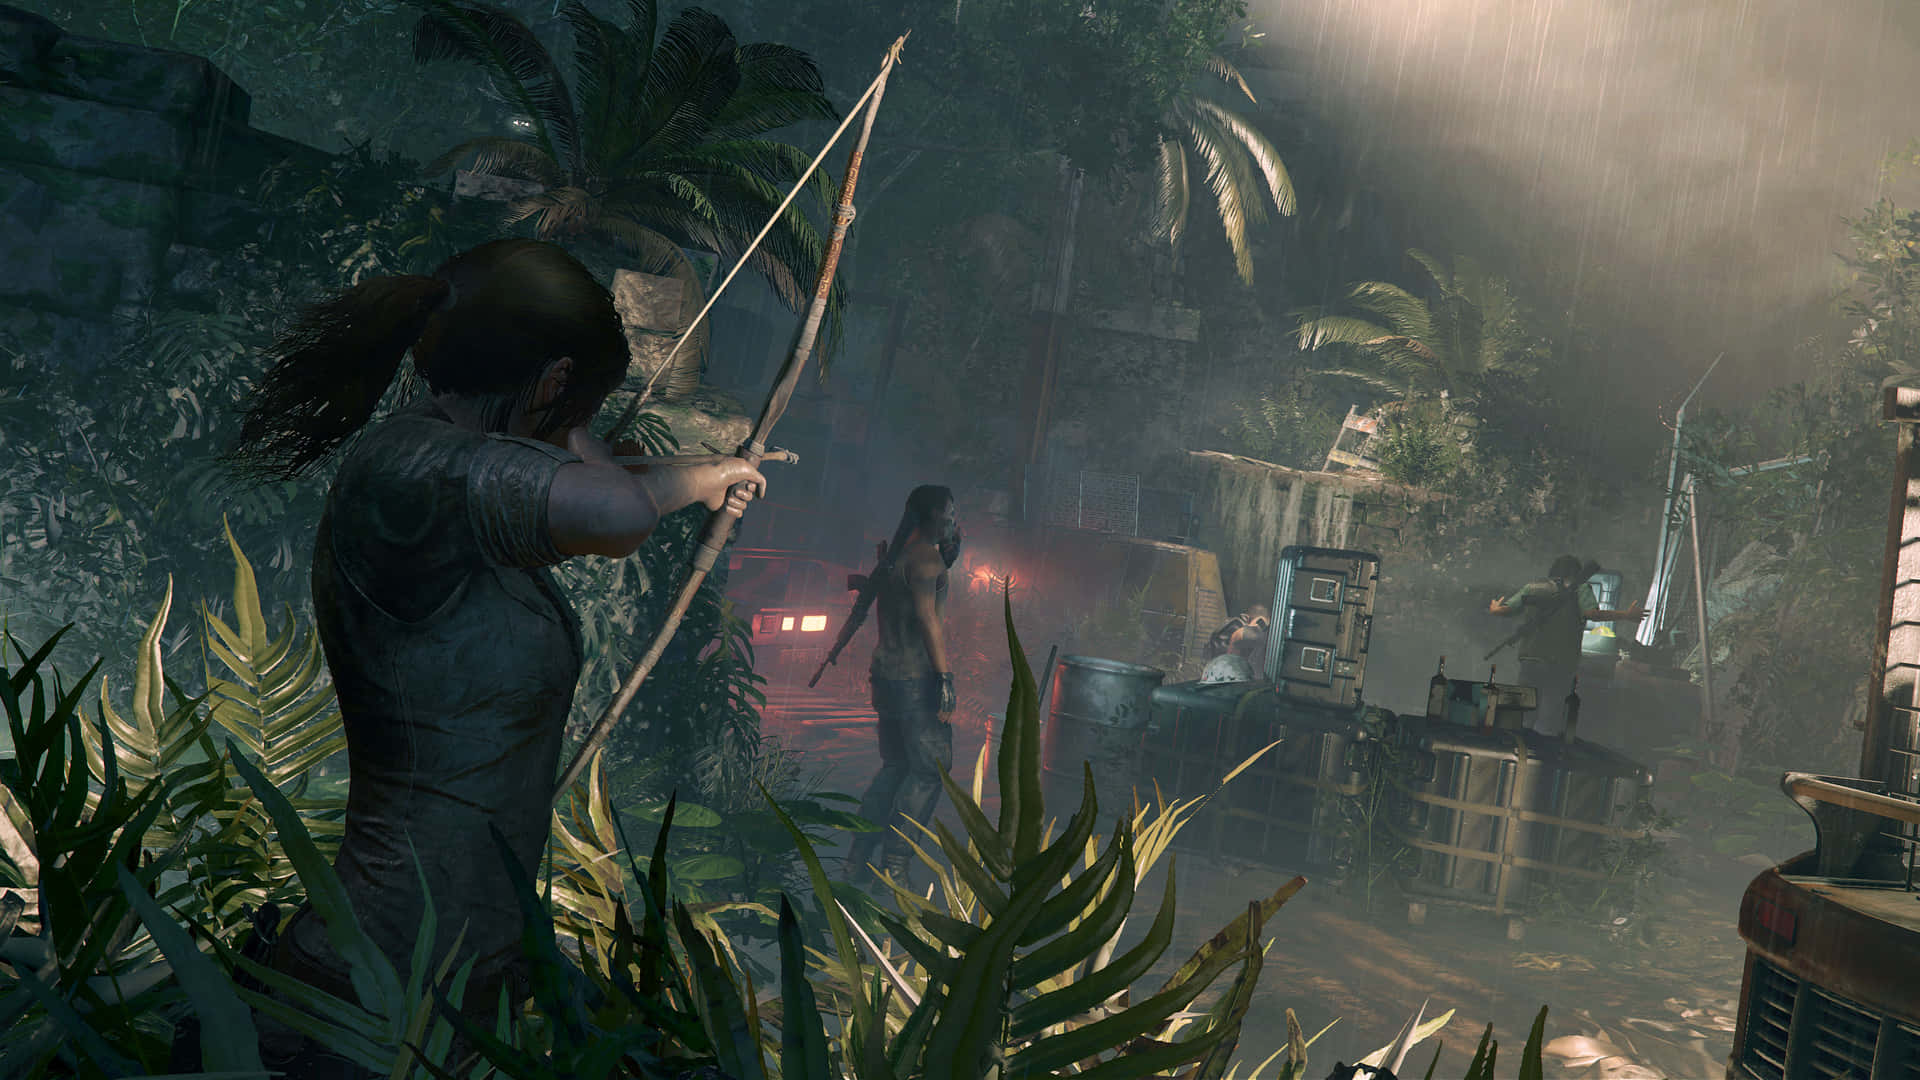 Lara Croft in a fight for survival in Shadow of the Tomb Raider